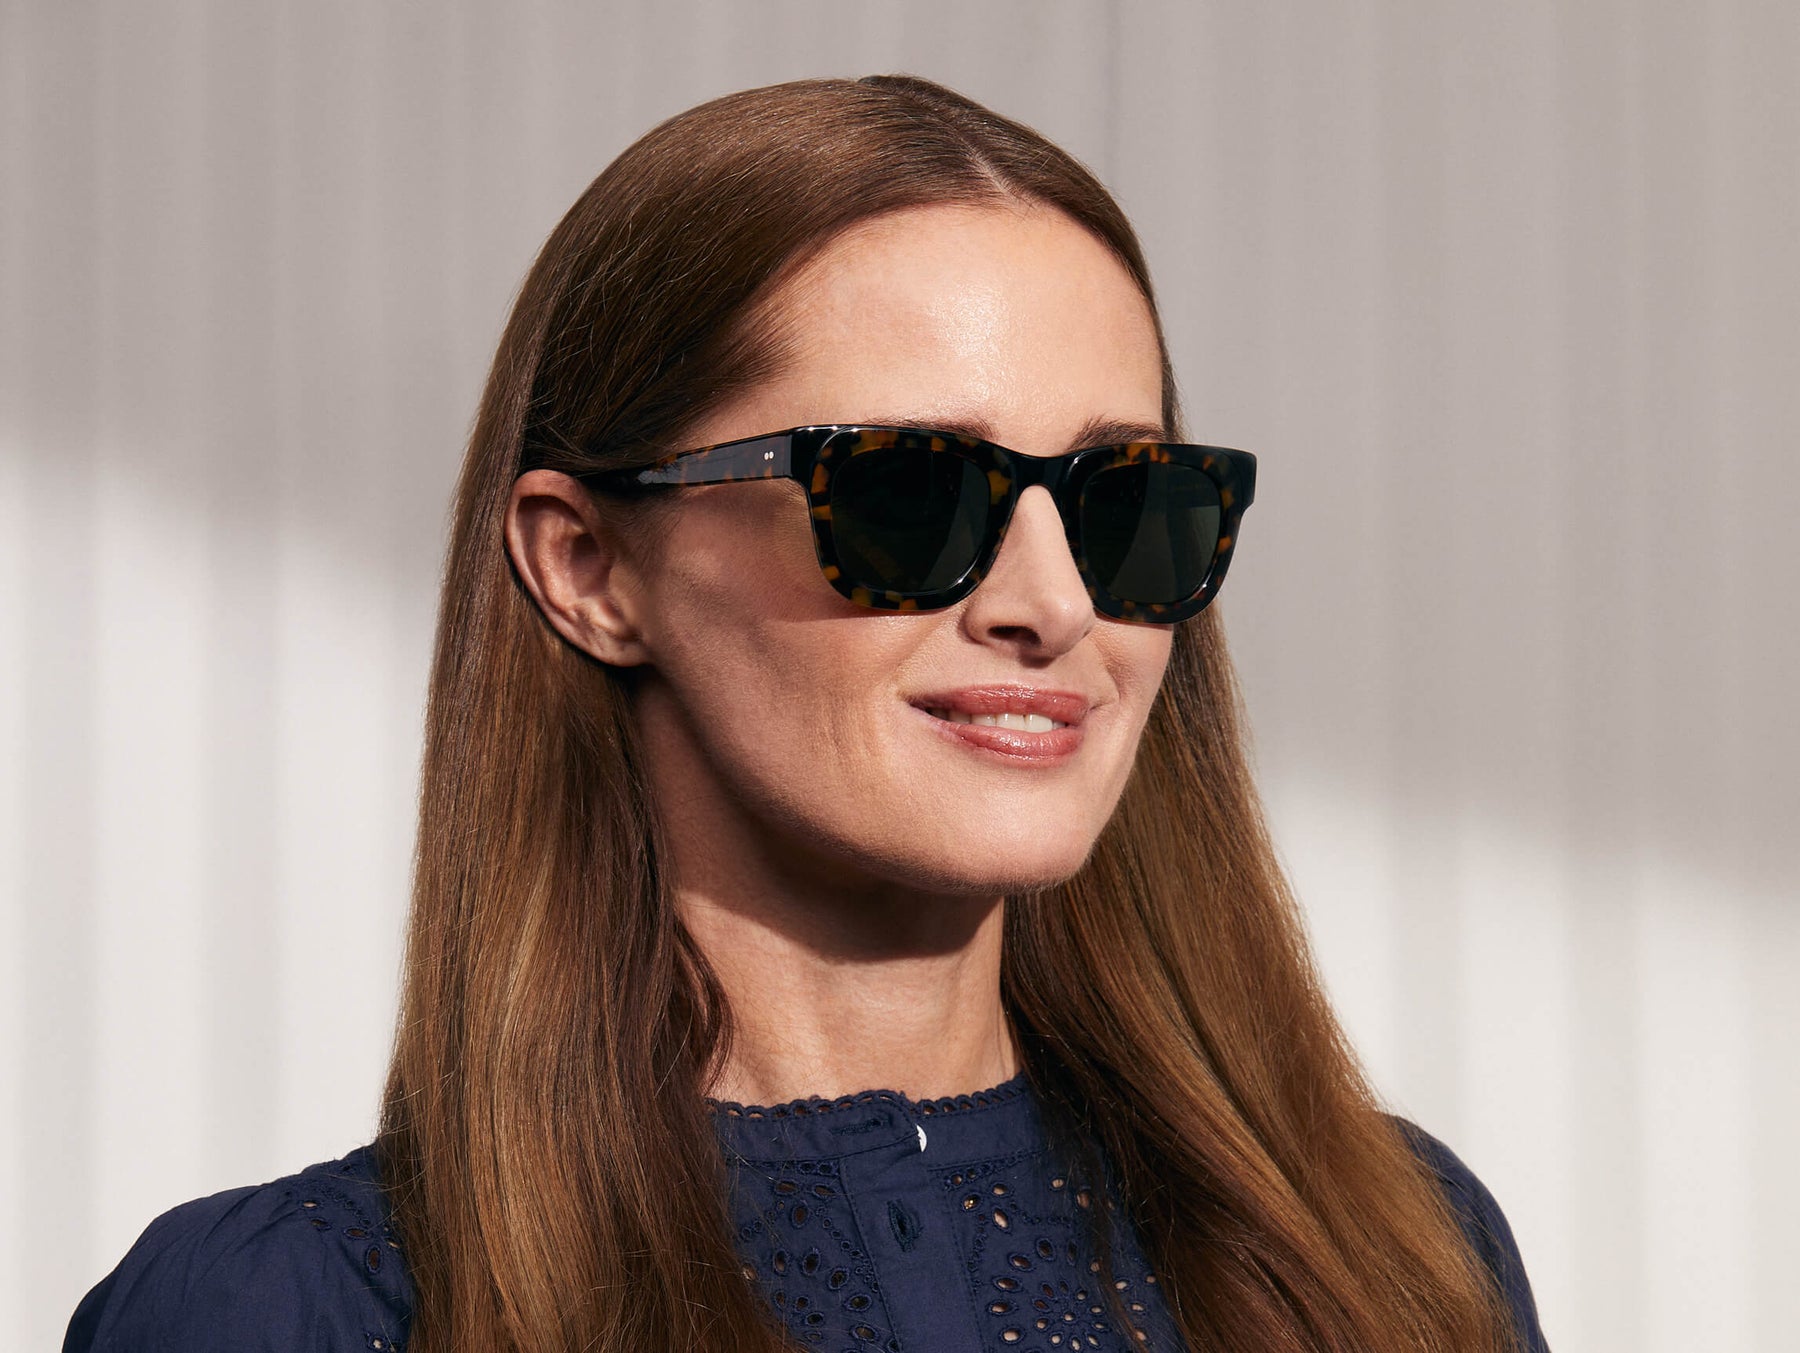 Model is wearing The FRITZ SUN in Tortoise/Black in size 47 with G-15 Glass Lenses